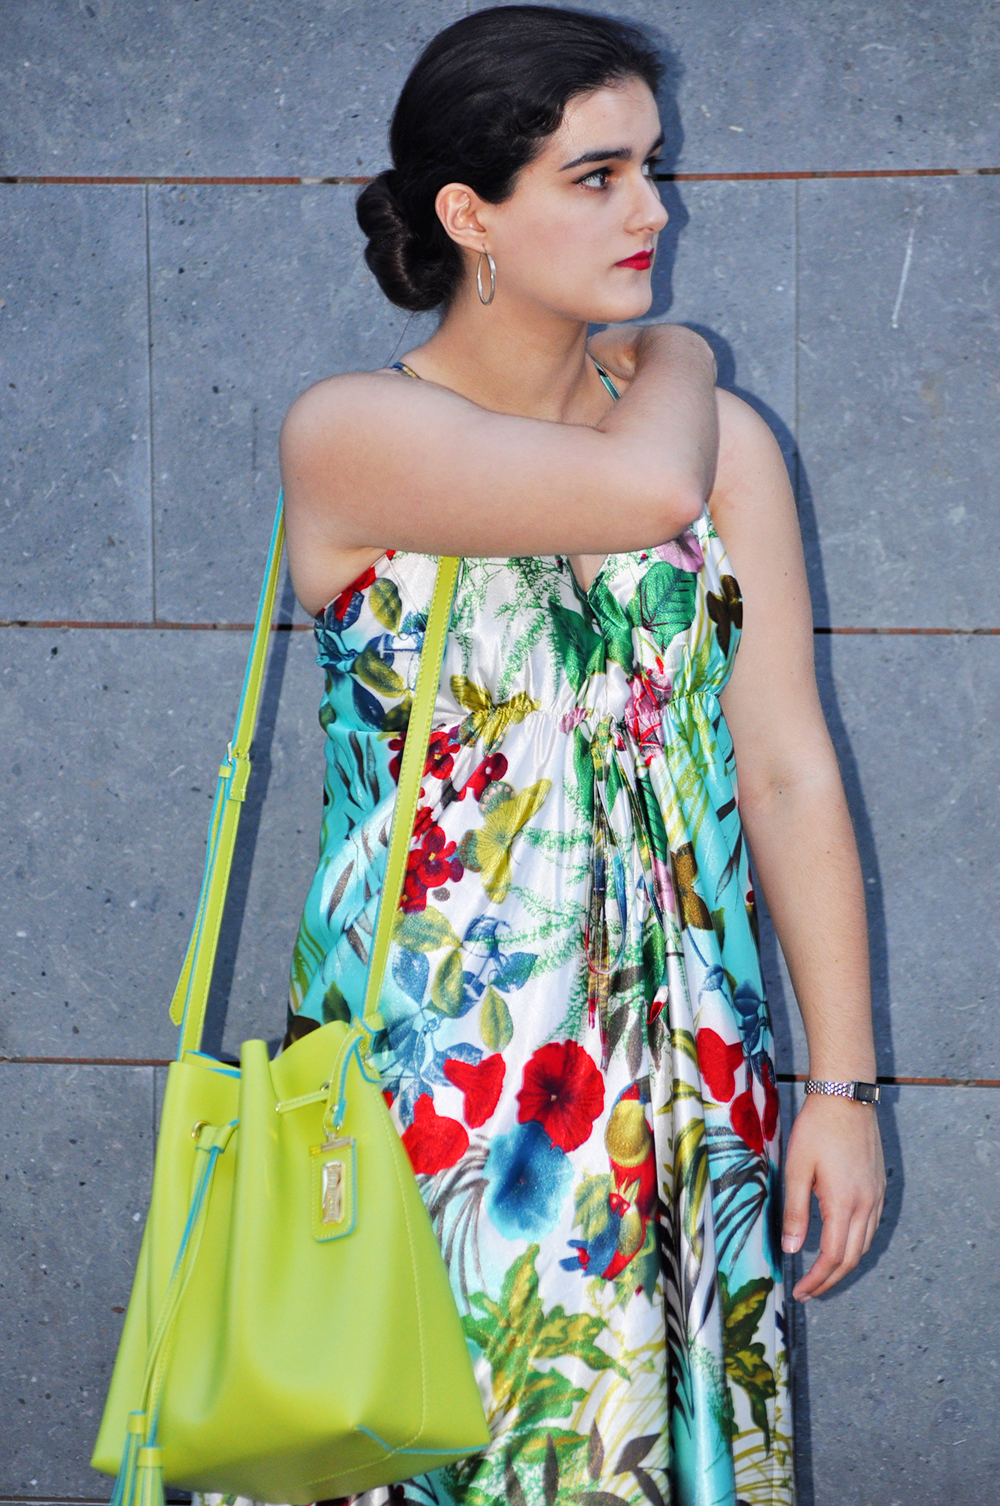 valencia fashion blogger, something fashion moda style streetstyle, floral flower dress how to wear, stonefly steve madden bag, spanish typical outfit flamenco low bun hairstyle